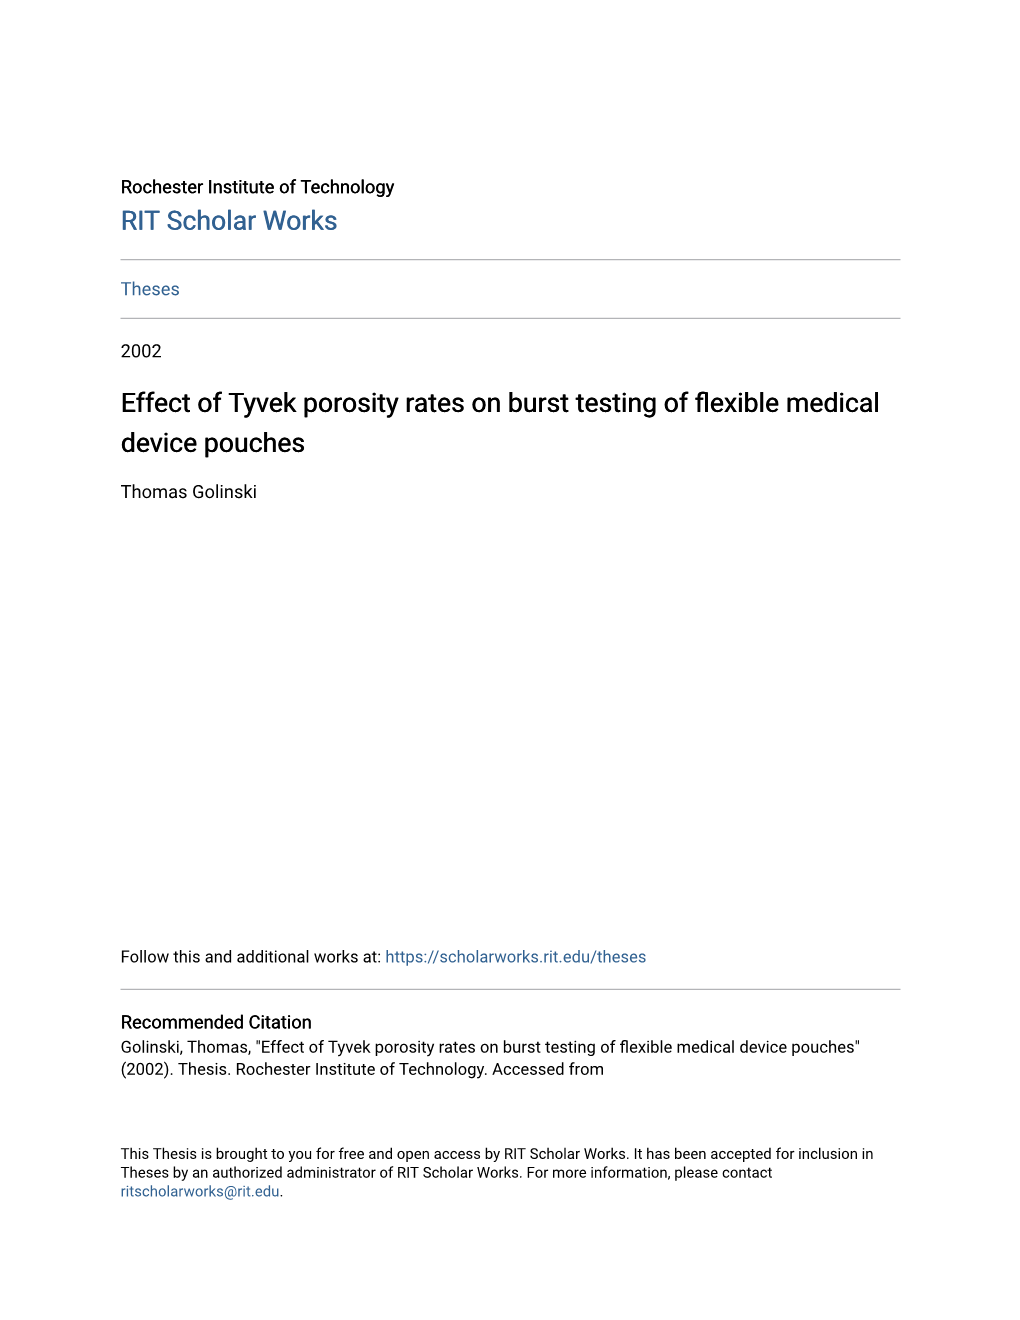 Effect of Tyvek Porosity Rates on Burst Testing of Flexible Medical Device Pouches